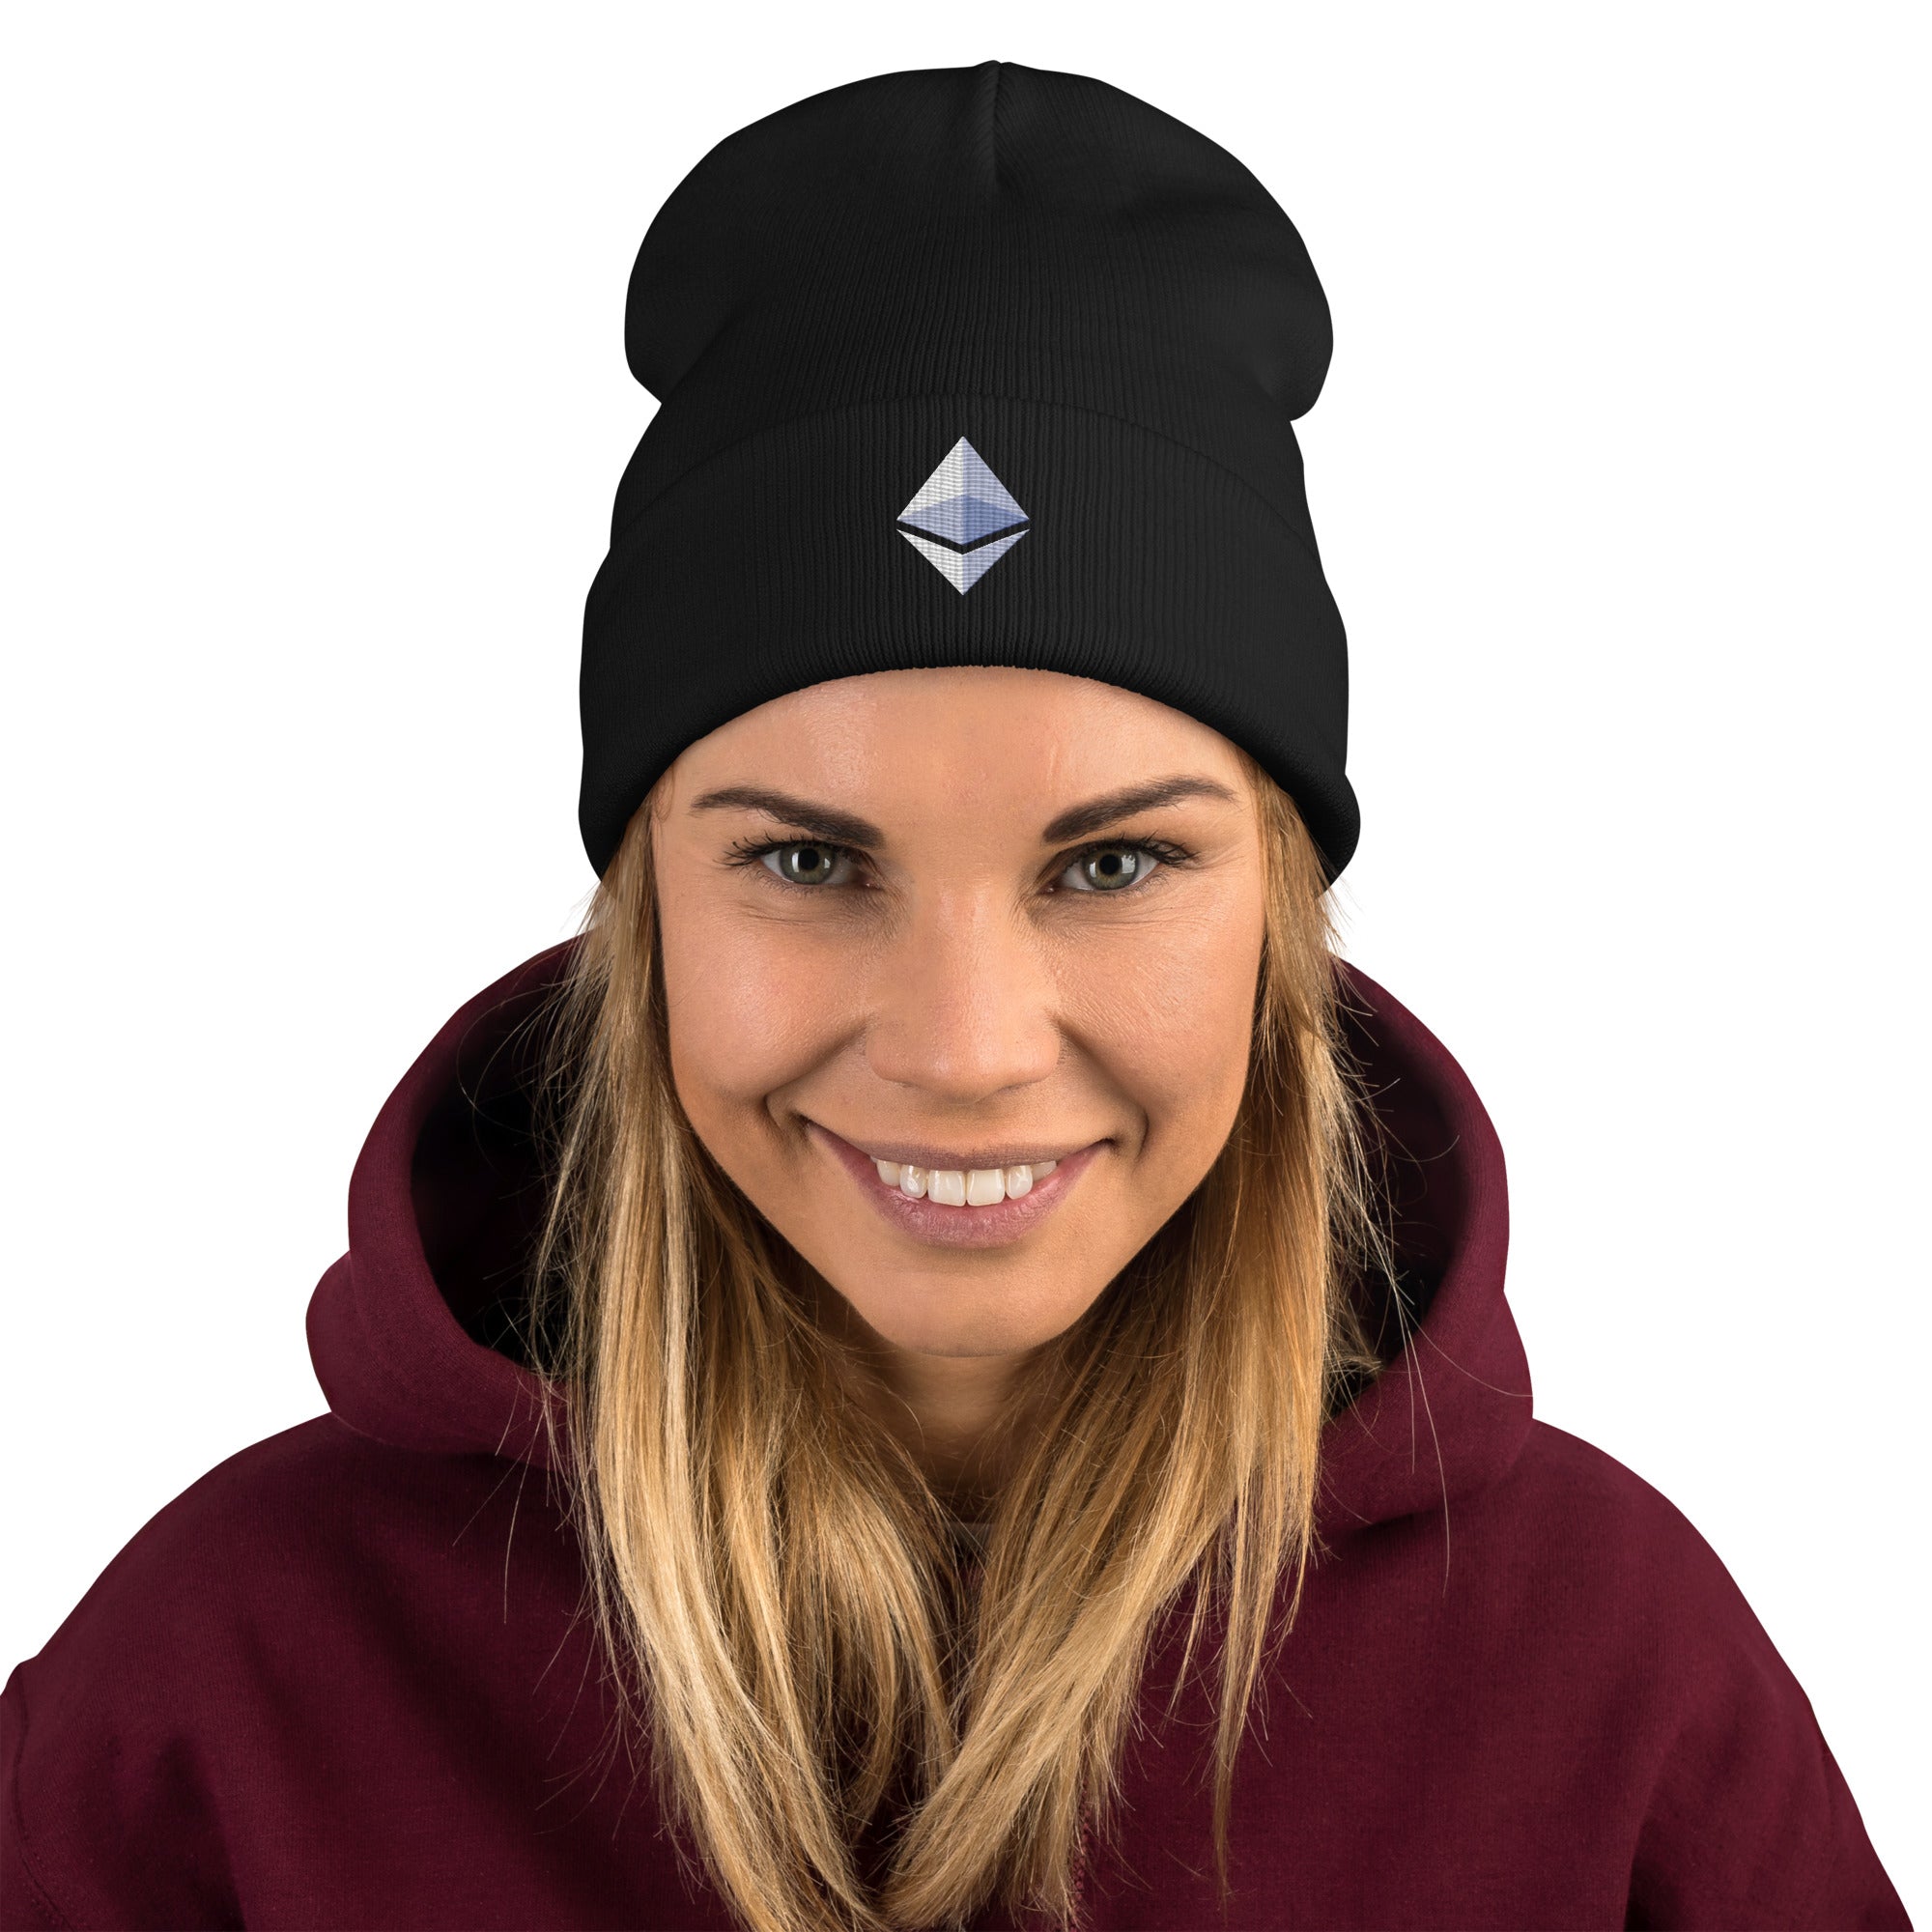 ETH Ethereum Cryptocurrency Symbol Embroidered Cuff Beanie Cap